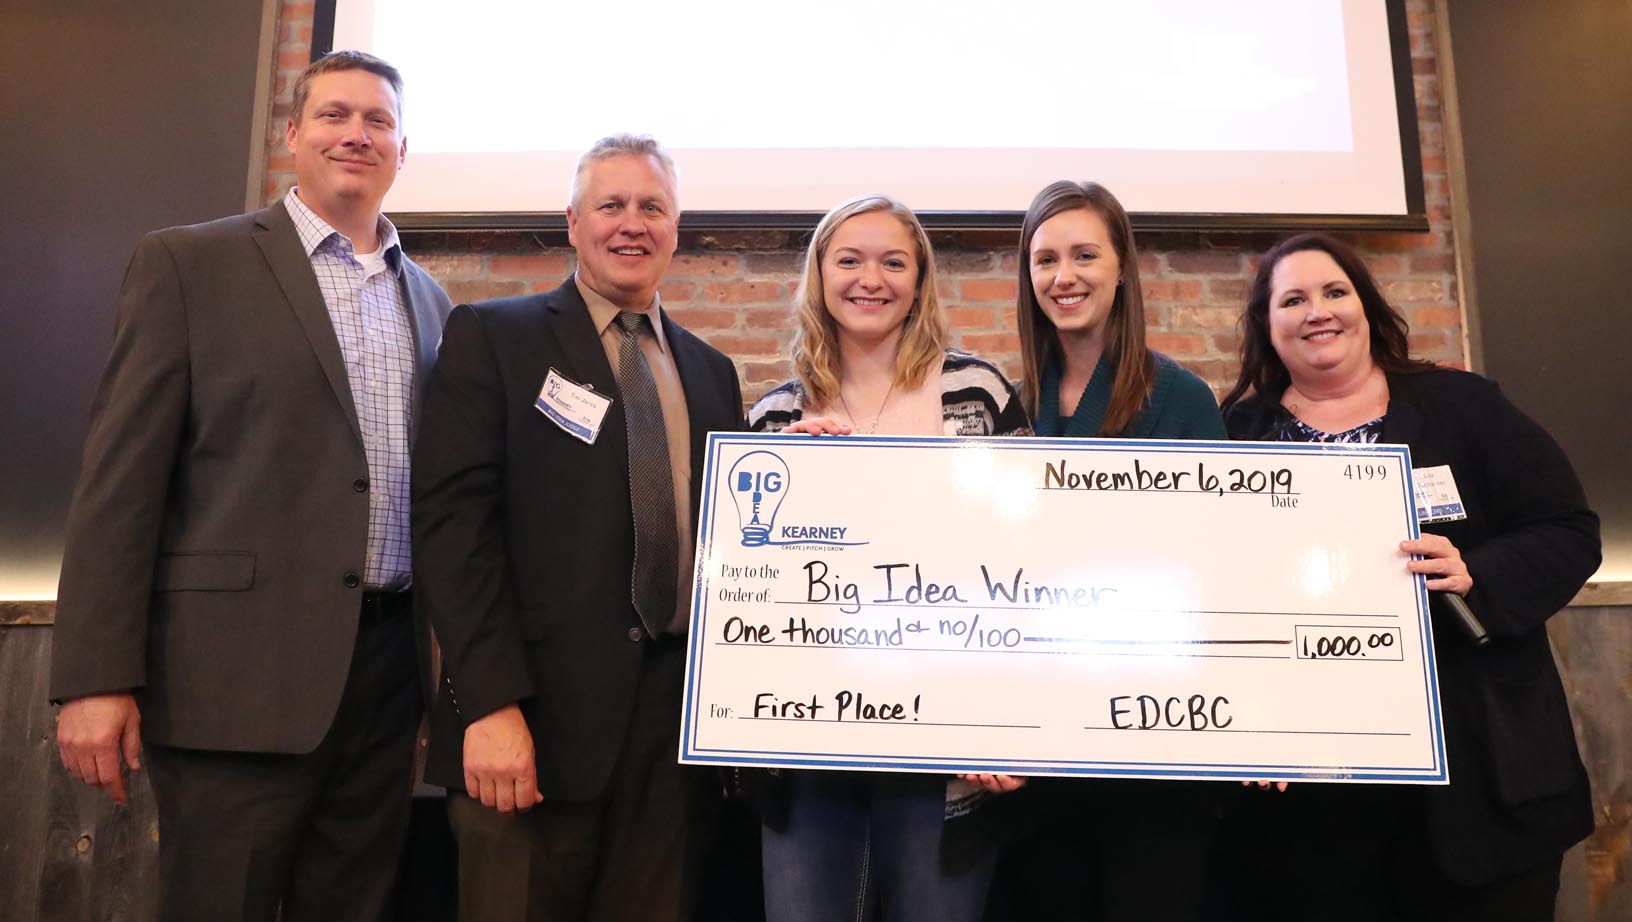 UNK student Nicole Mittman, center, pitched her glow-in-the-dark paintings to win the college division during last year’s Big Idea Kearney competition. This year’s business contest, Big Idea UNK, will be conducted completely online and it’s open only to current UNK students.